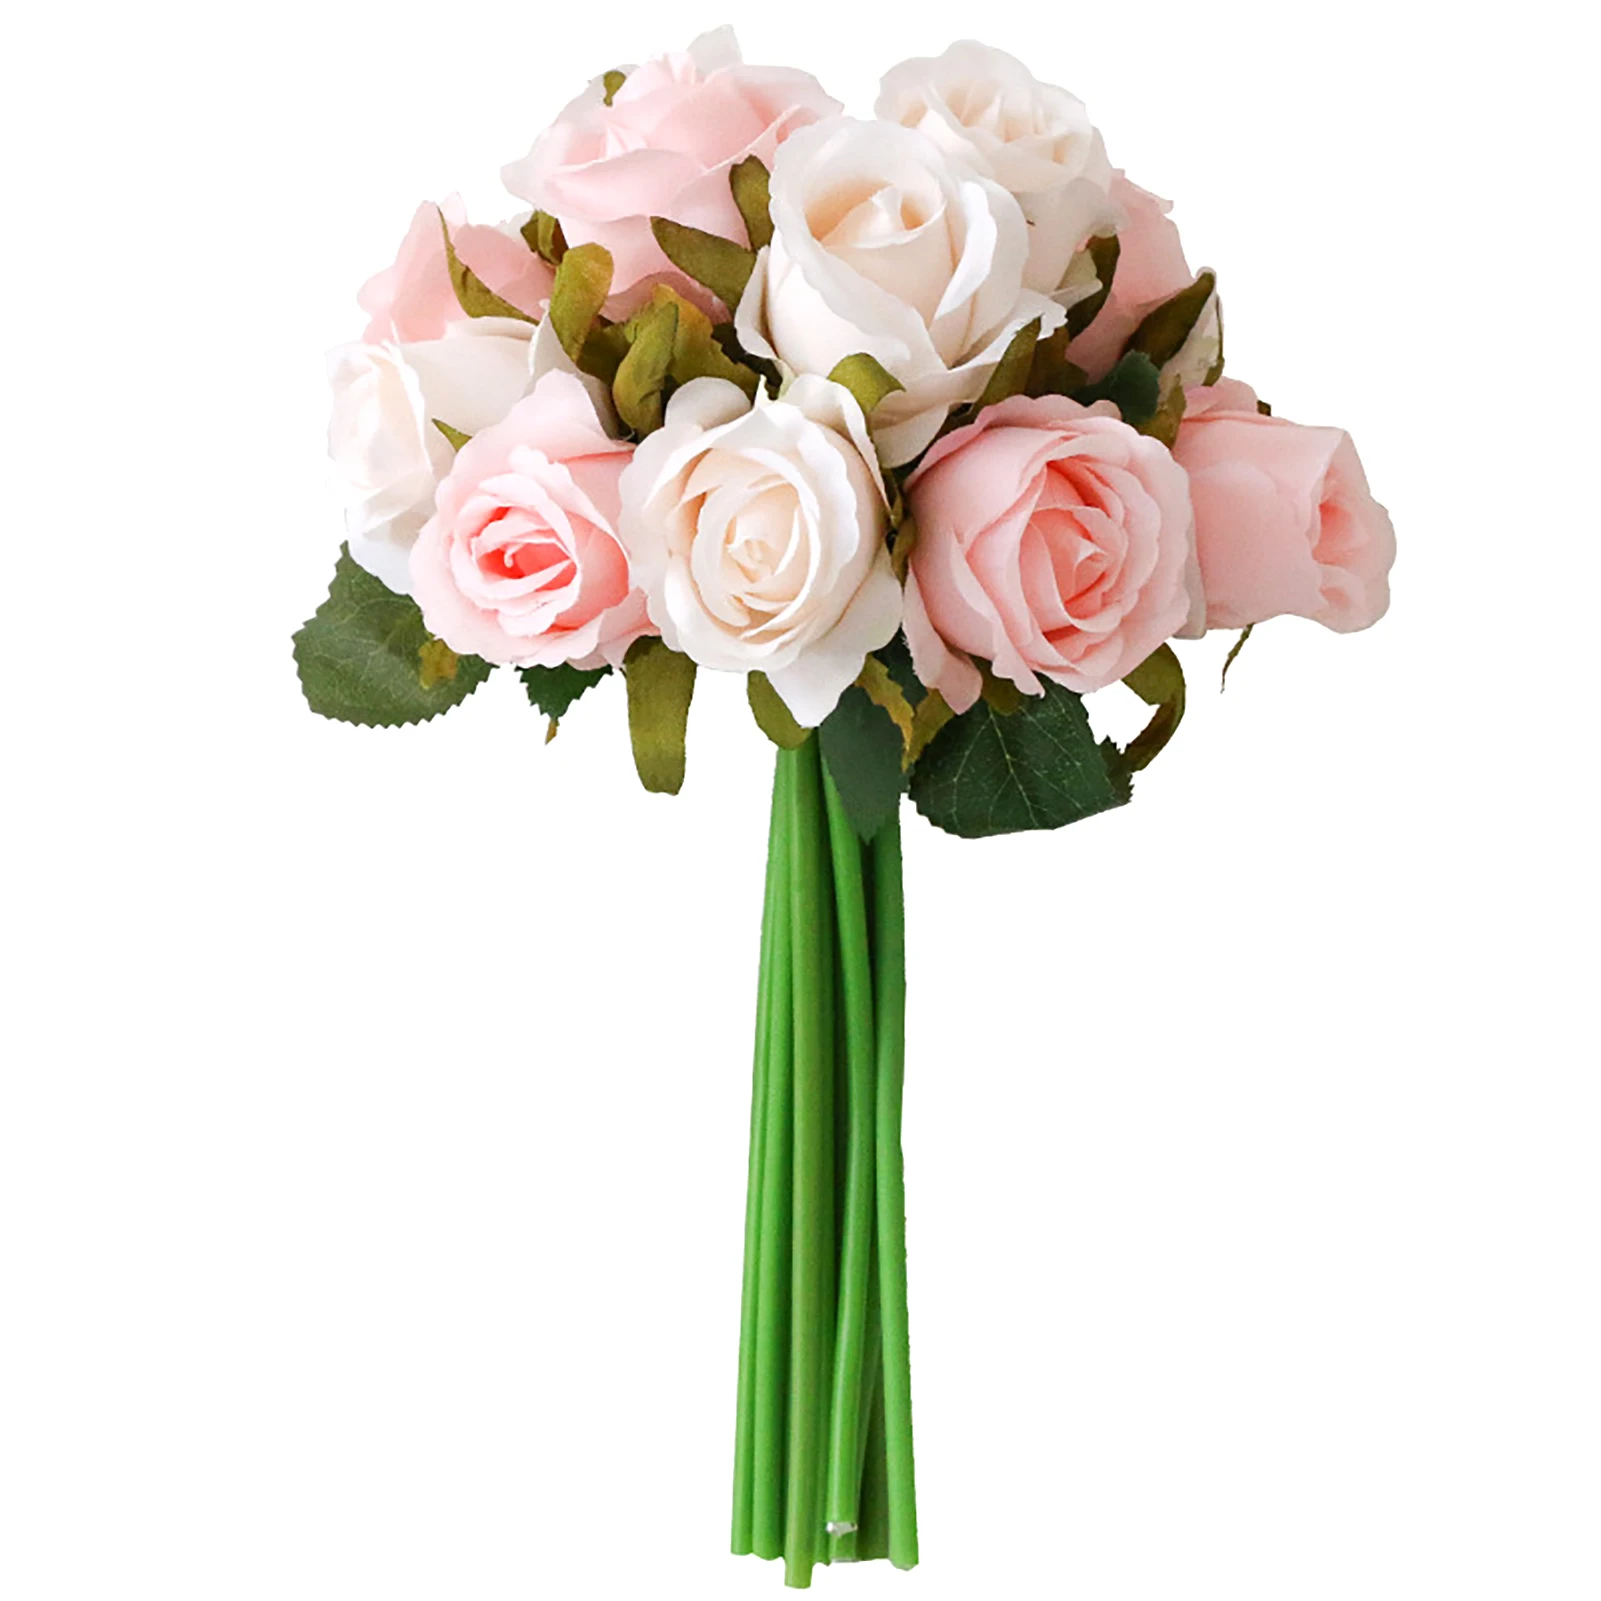 Vase Artificial Flower 12 Heads Rose Bud Artificial Flowers for Wedding Simulation Flower Home Decor Valentine's Gift,Colour:Champagne Color : Champagne 